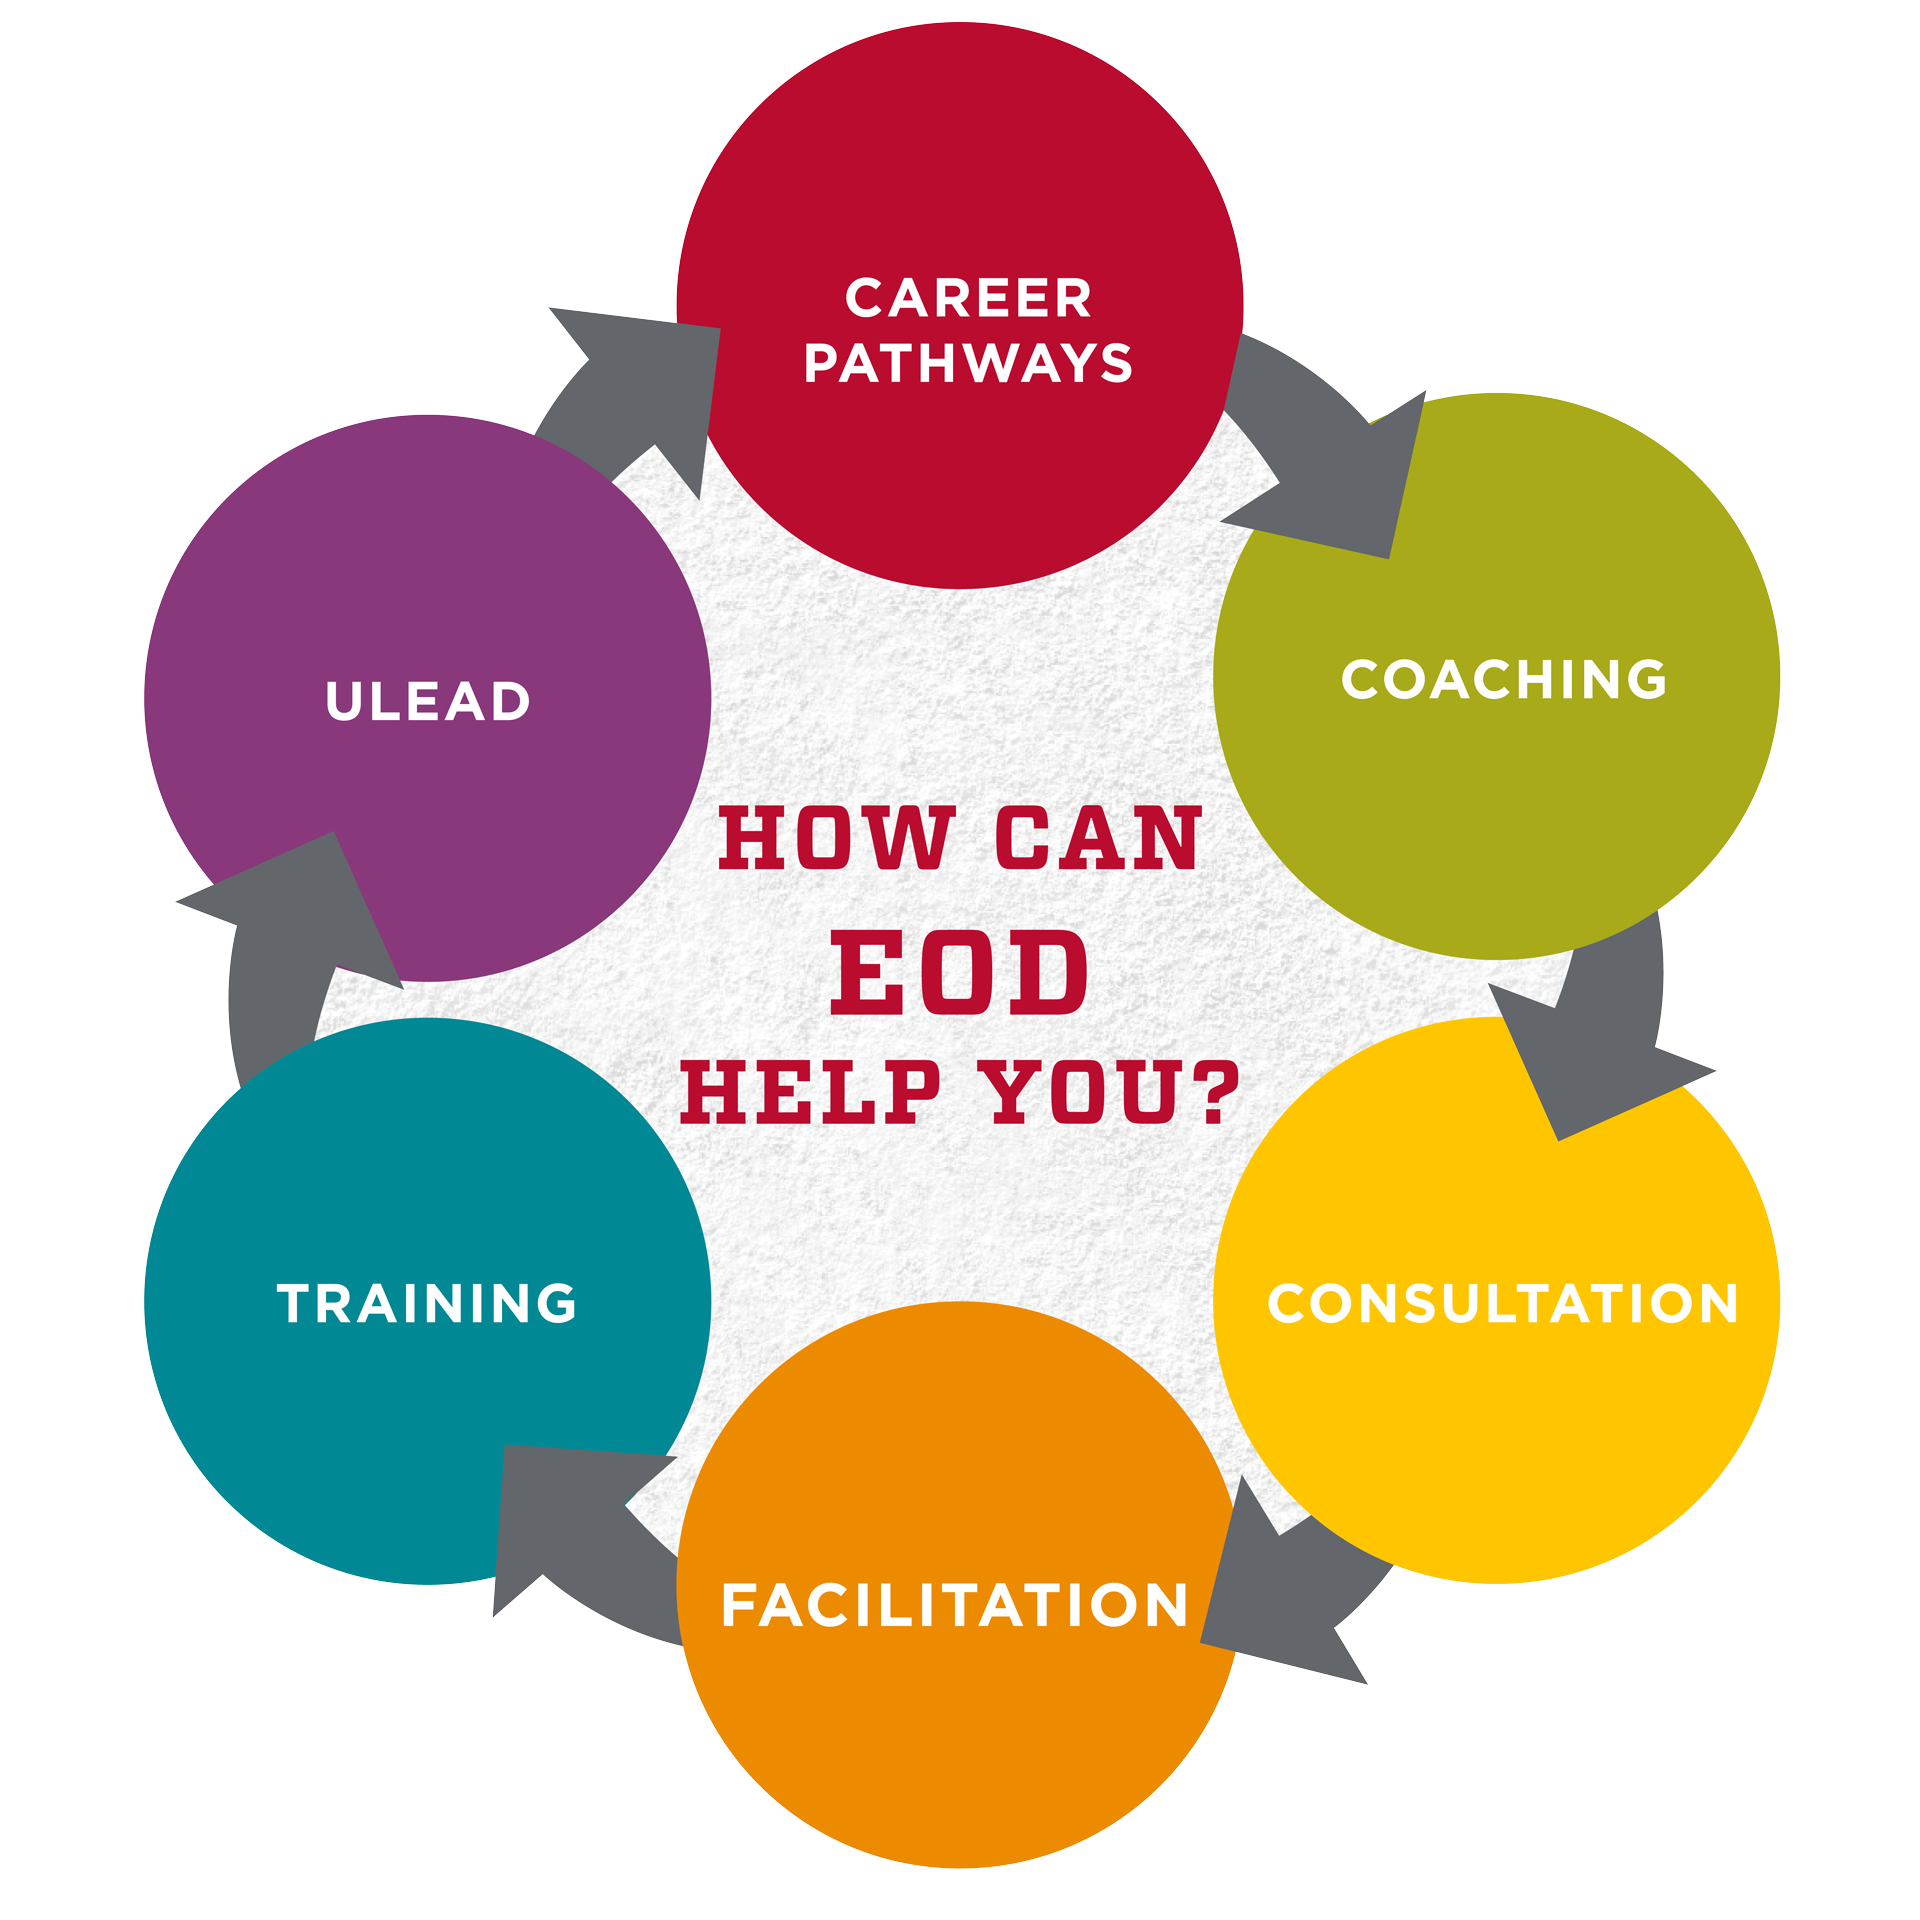 How can EOD help you? Career Pathways, Coaching, Consultation, Facilitation, Training, Ulead